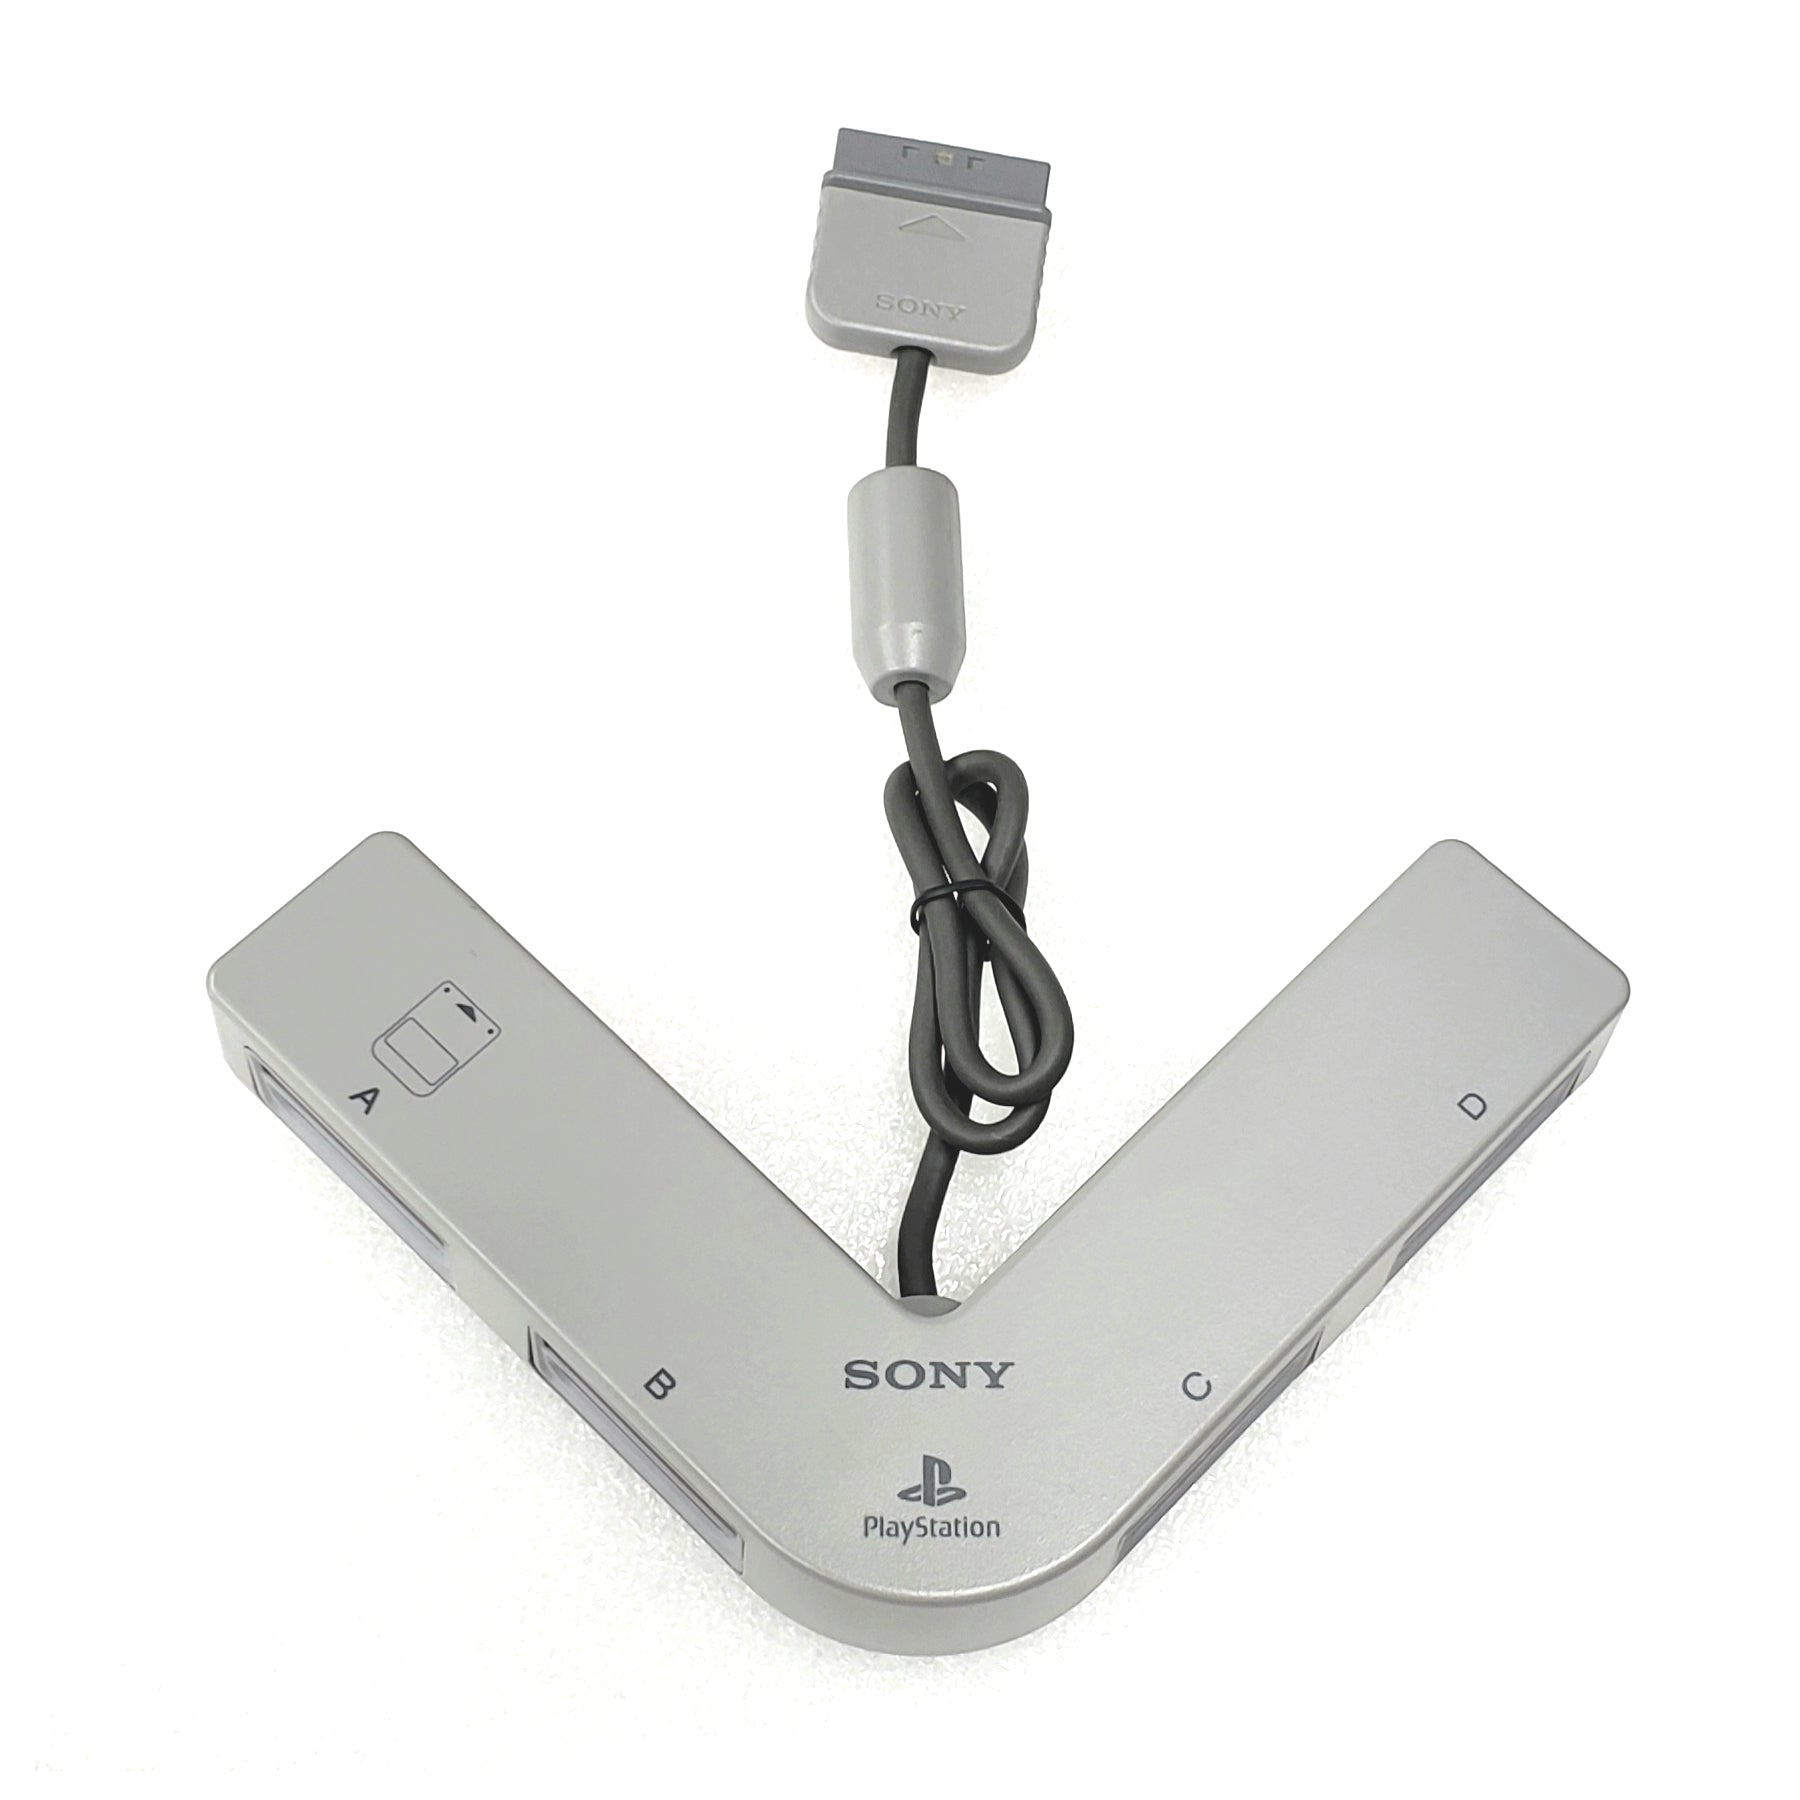 Sony PlayStation 1 (PS1) Multitap - YourGamingShop.com - Buy, Sell, Trade Video Games Online. 120 Day Warranty. Satisfaction Guaranteed.